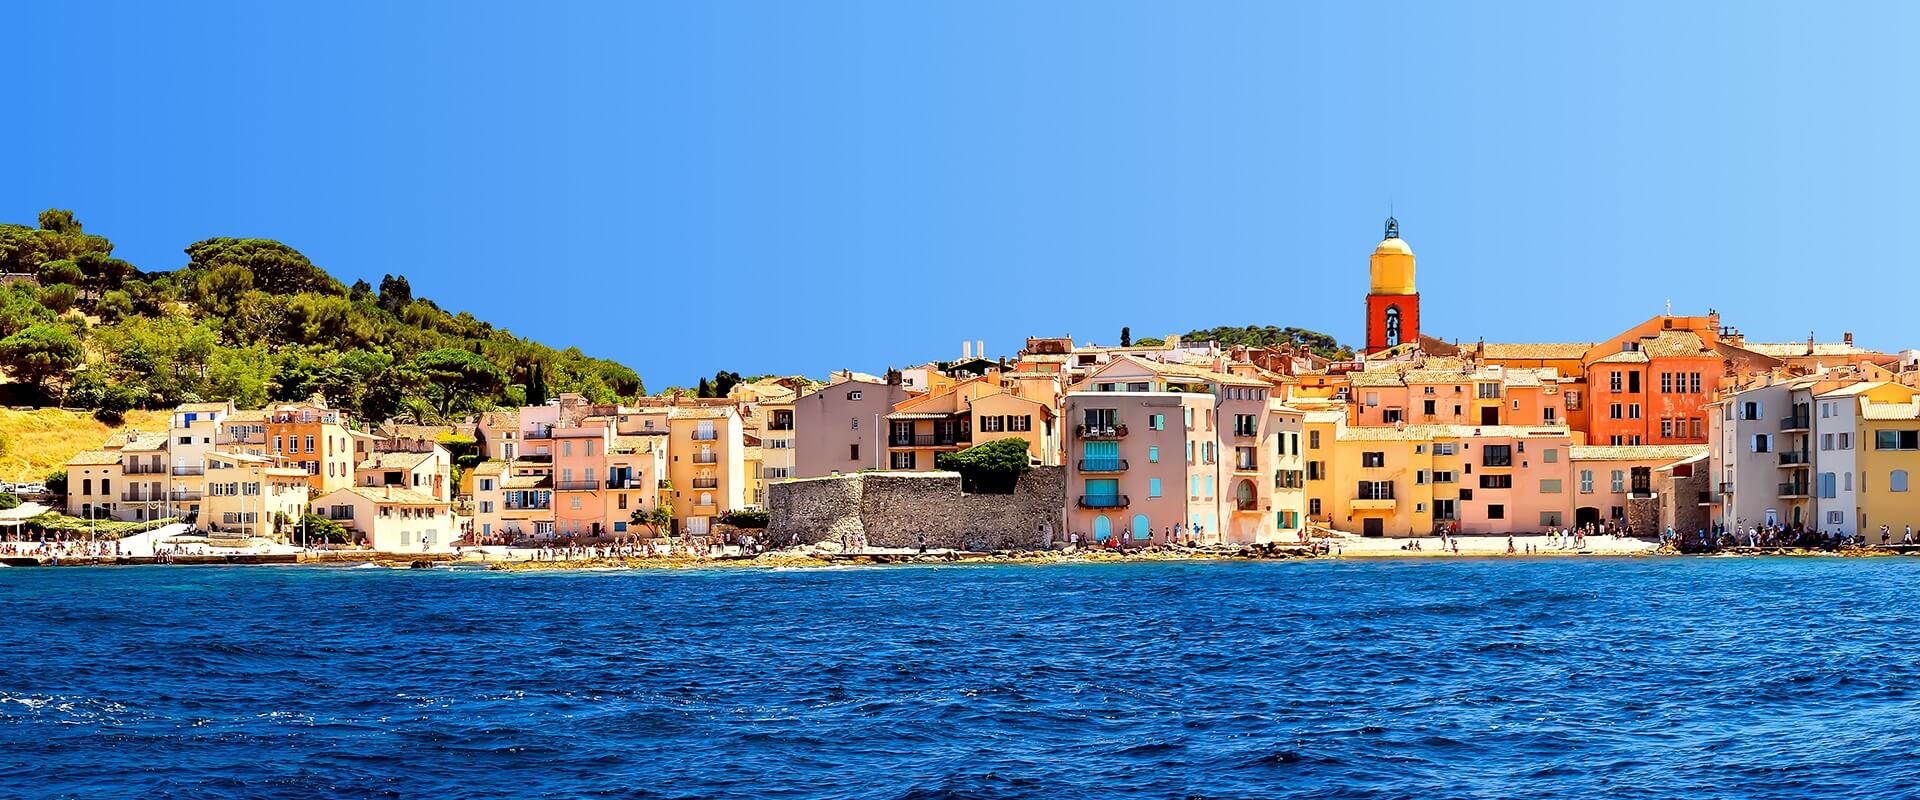 Cruise by boat to Saint-Tropez, departure from Nice - Trans Côte d'Azur ...